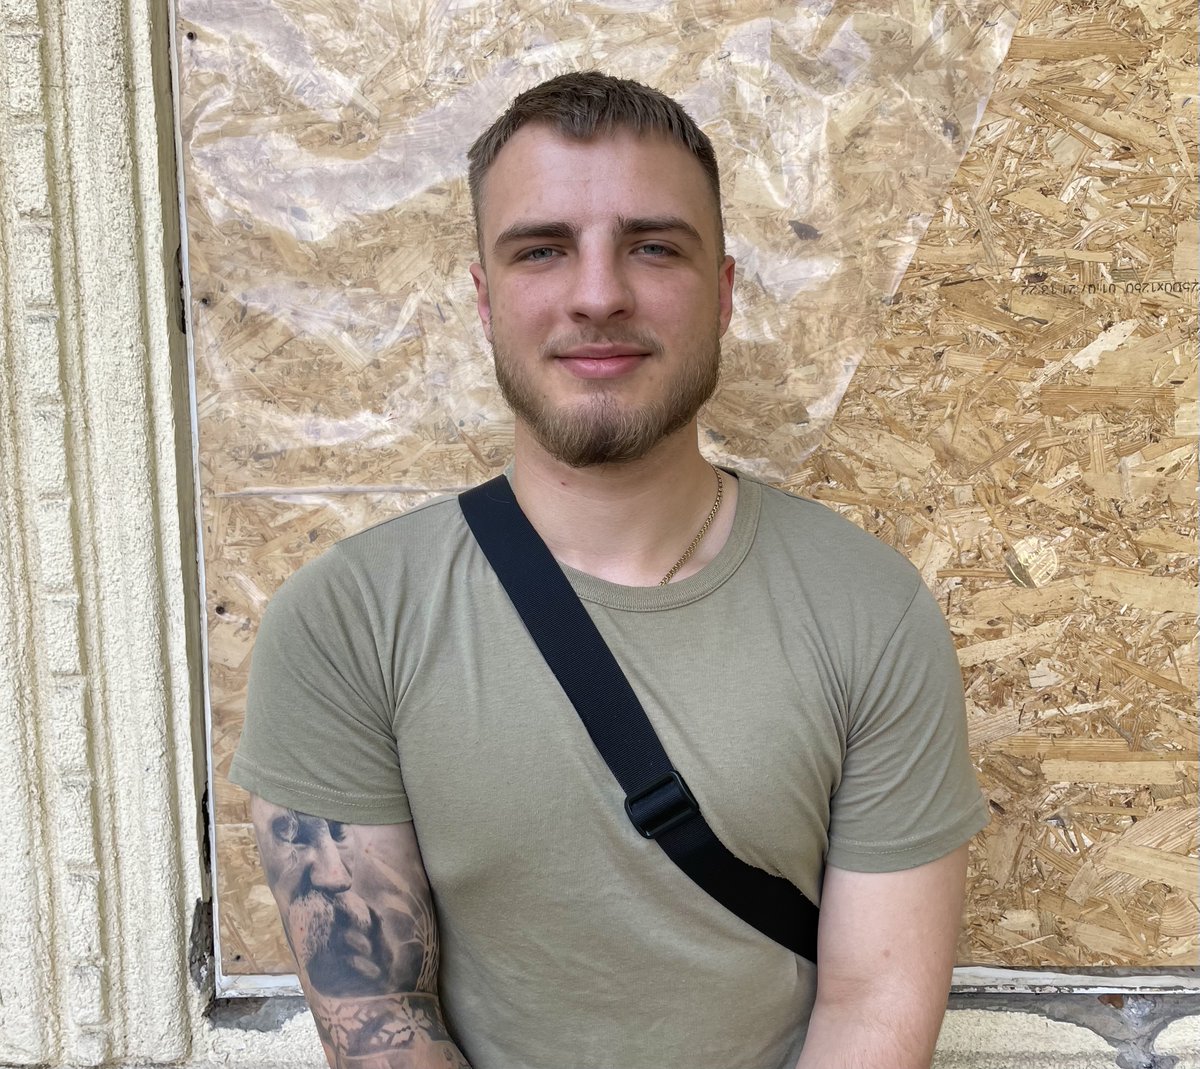 Dubliner 'Irlandets' (Irishman') wanted to join the defence of Kyiv in 2022, but his parents took his passport to stop him leaving (he was only 17). Since joining Ukraine's army last year he has flown strike drones in Bakhmut, Avdiivka and Kharkiv areas irishtimes.com/world/europe/2…